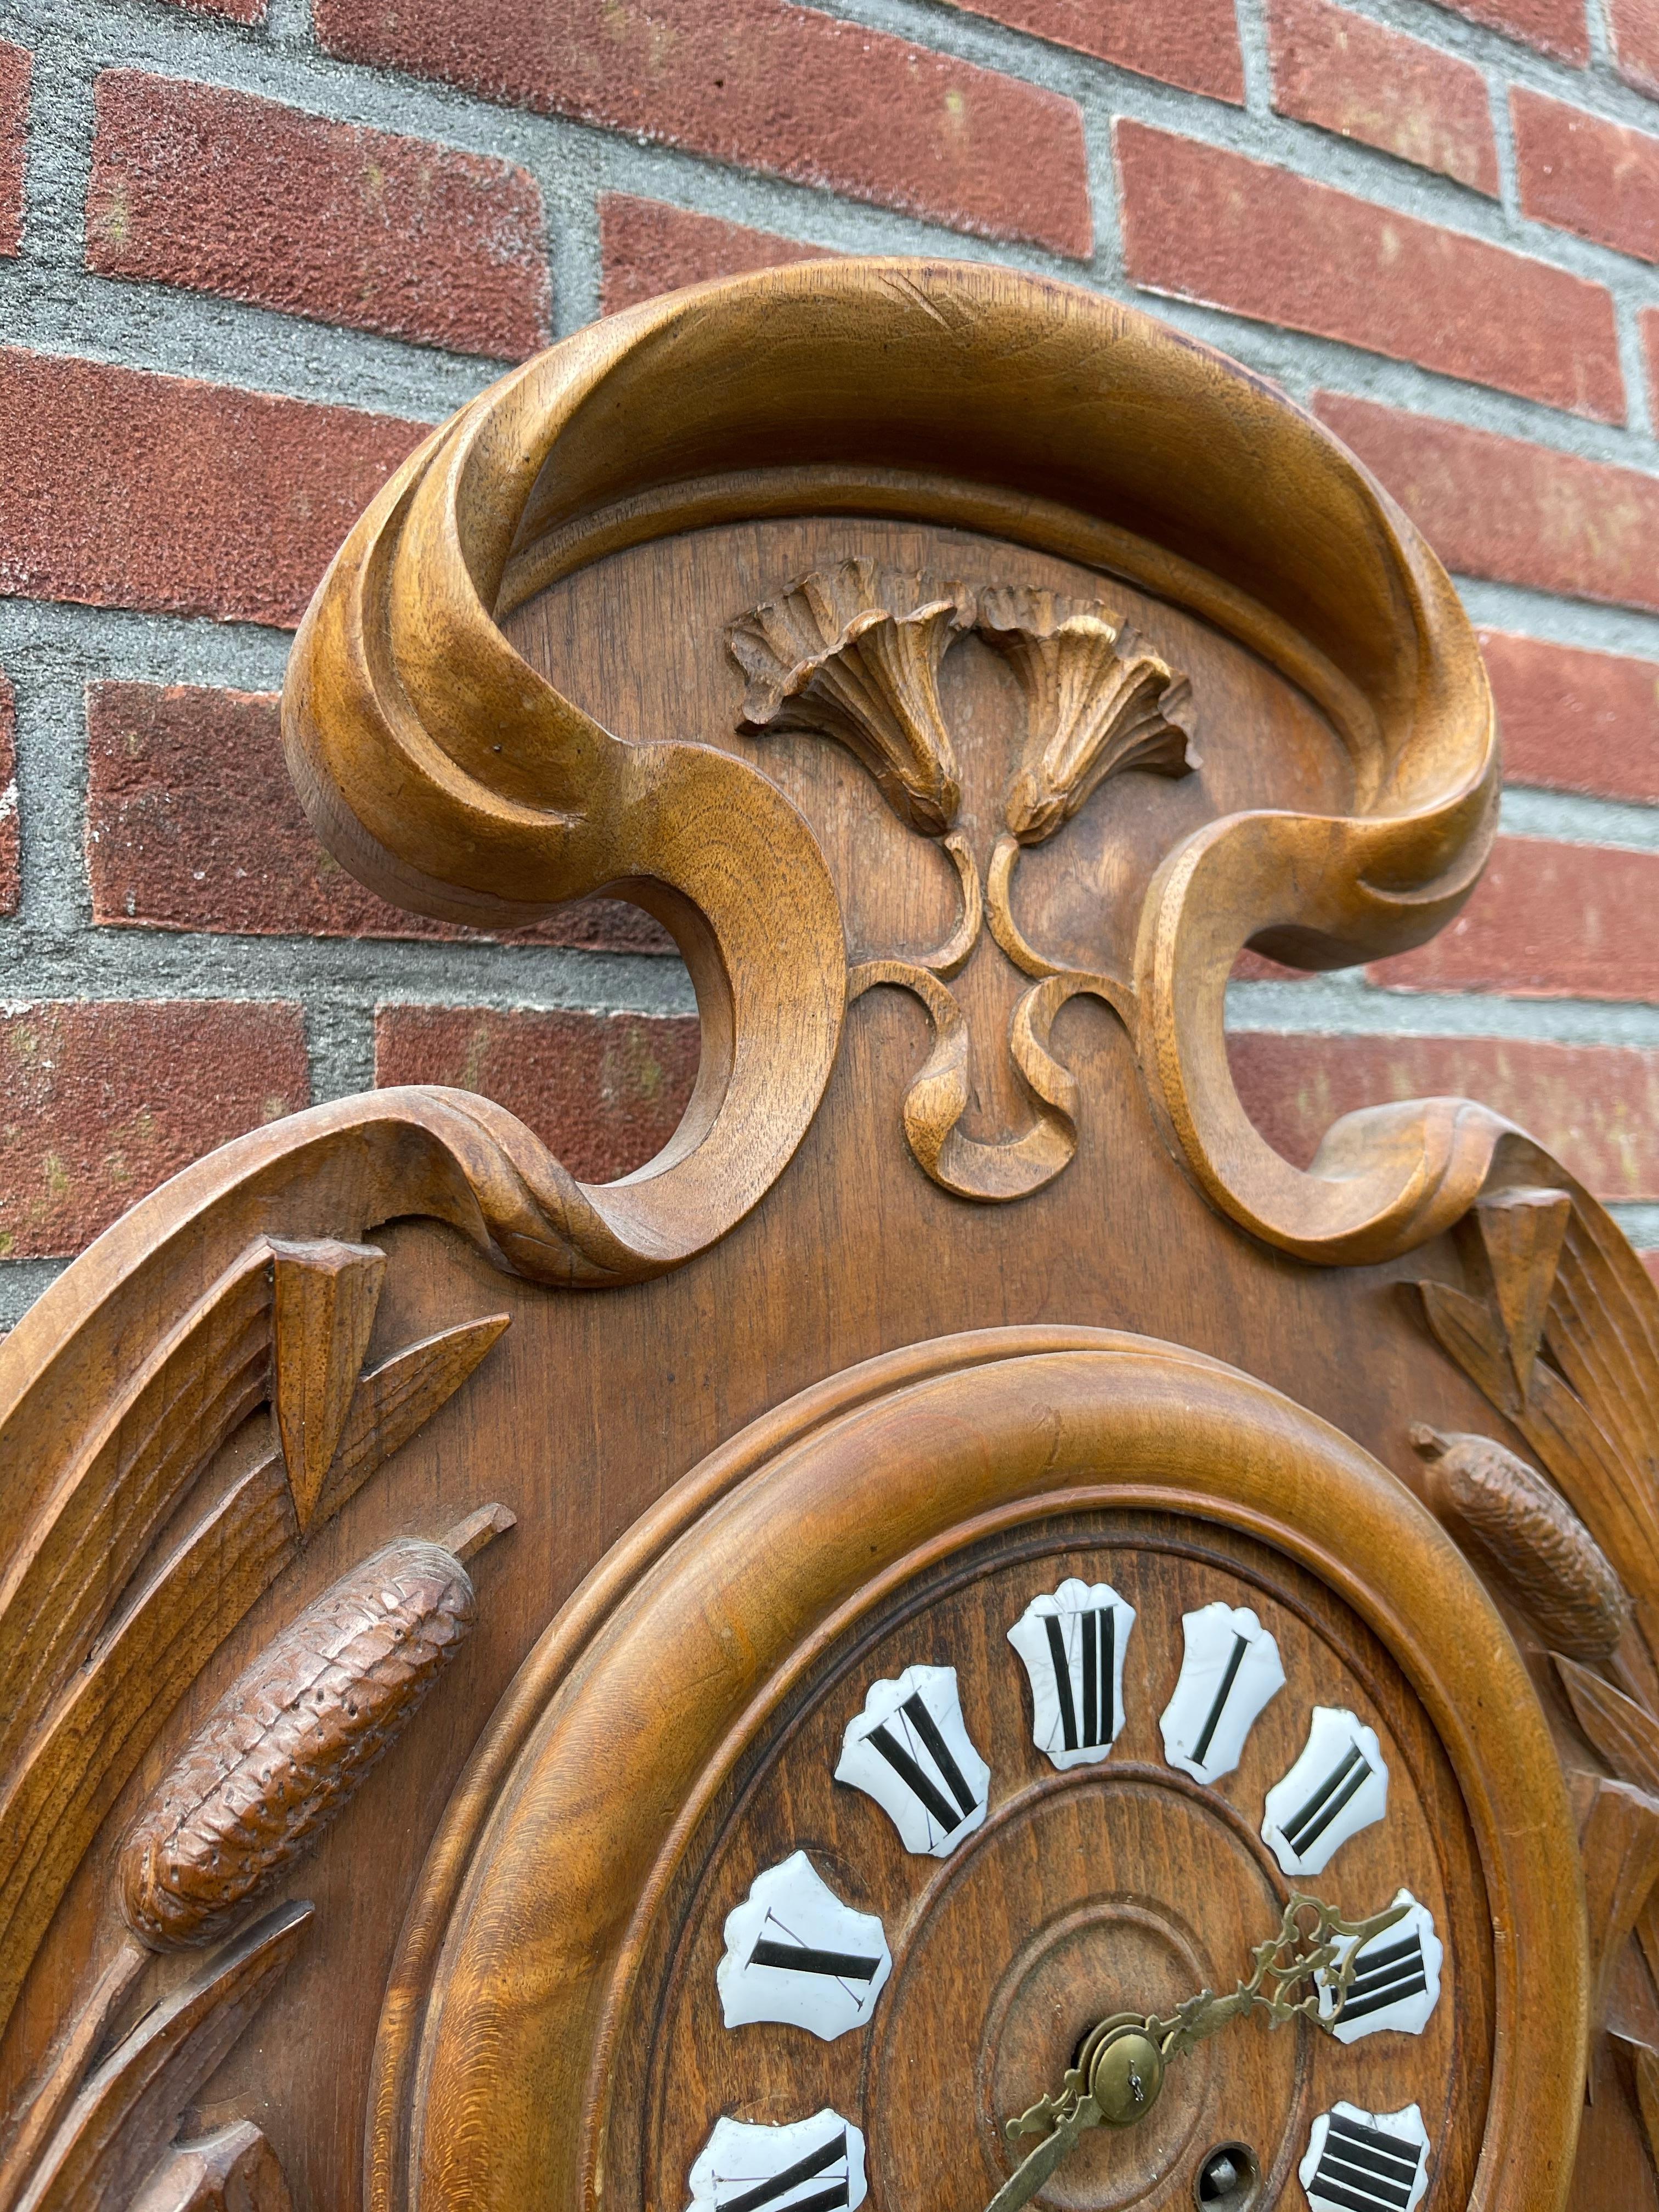 Unique Art Nouveau L'ecole Nancy Style Carved Wall Clock Thermometer & Barometer For Sale 6